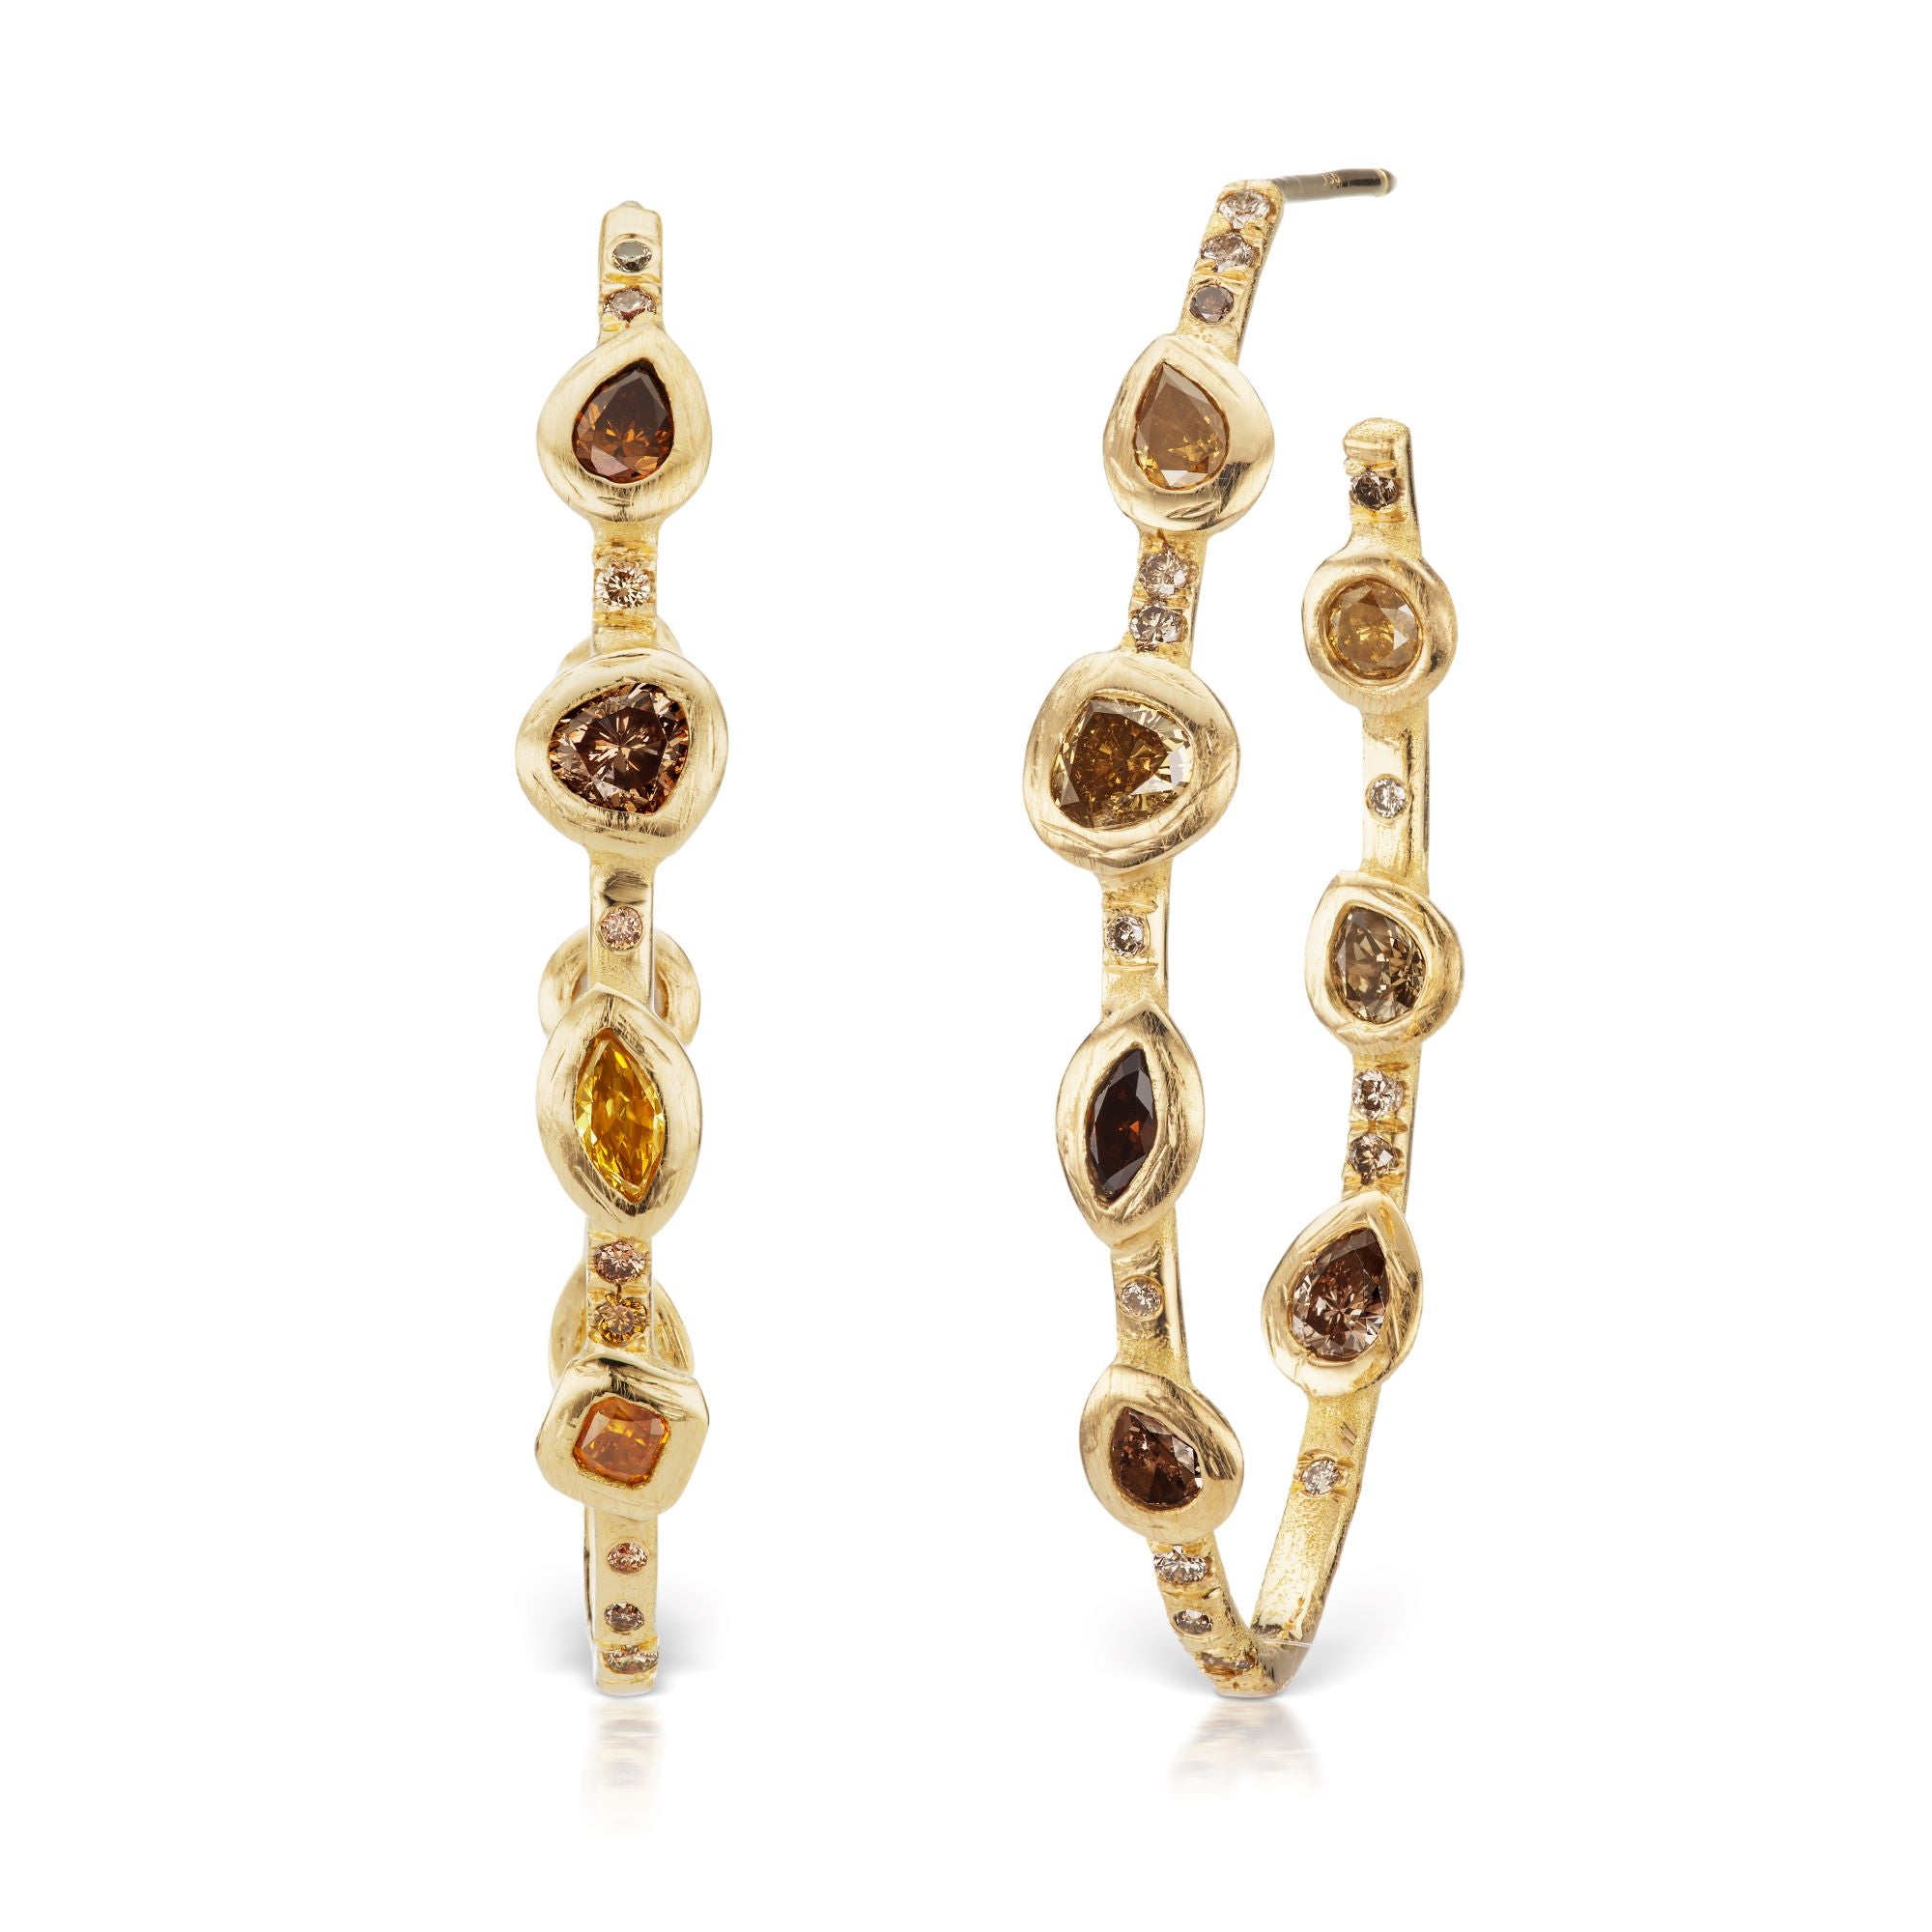 Gold Plated Hoop Earrings with Blue Stone | Juulry.com